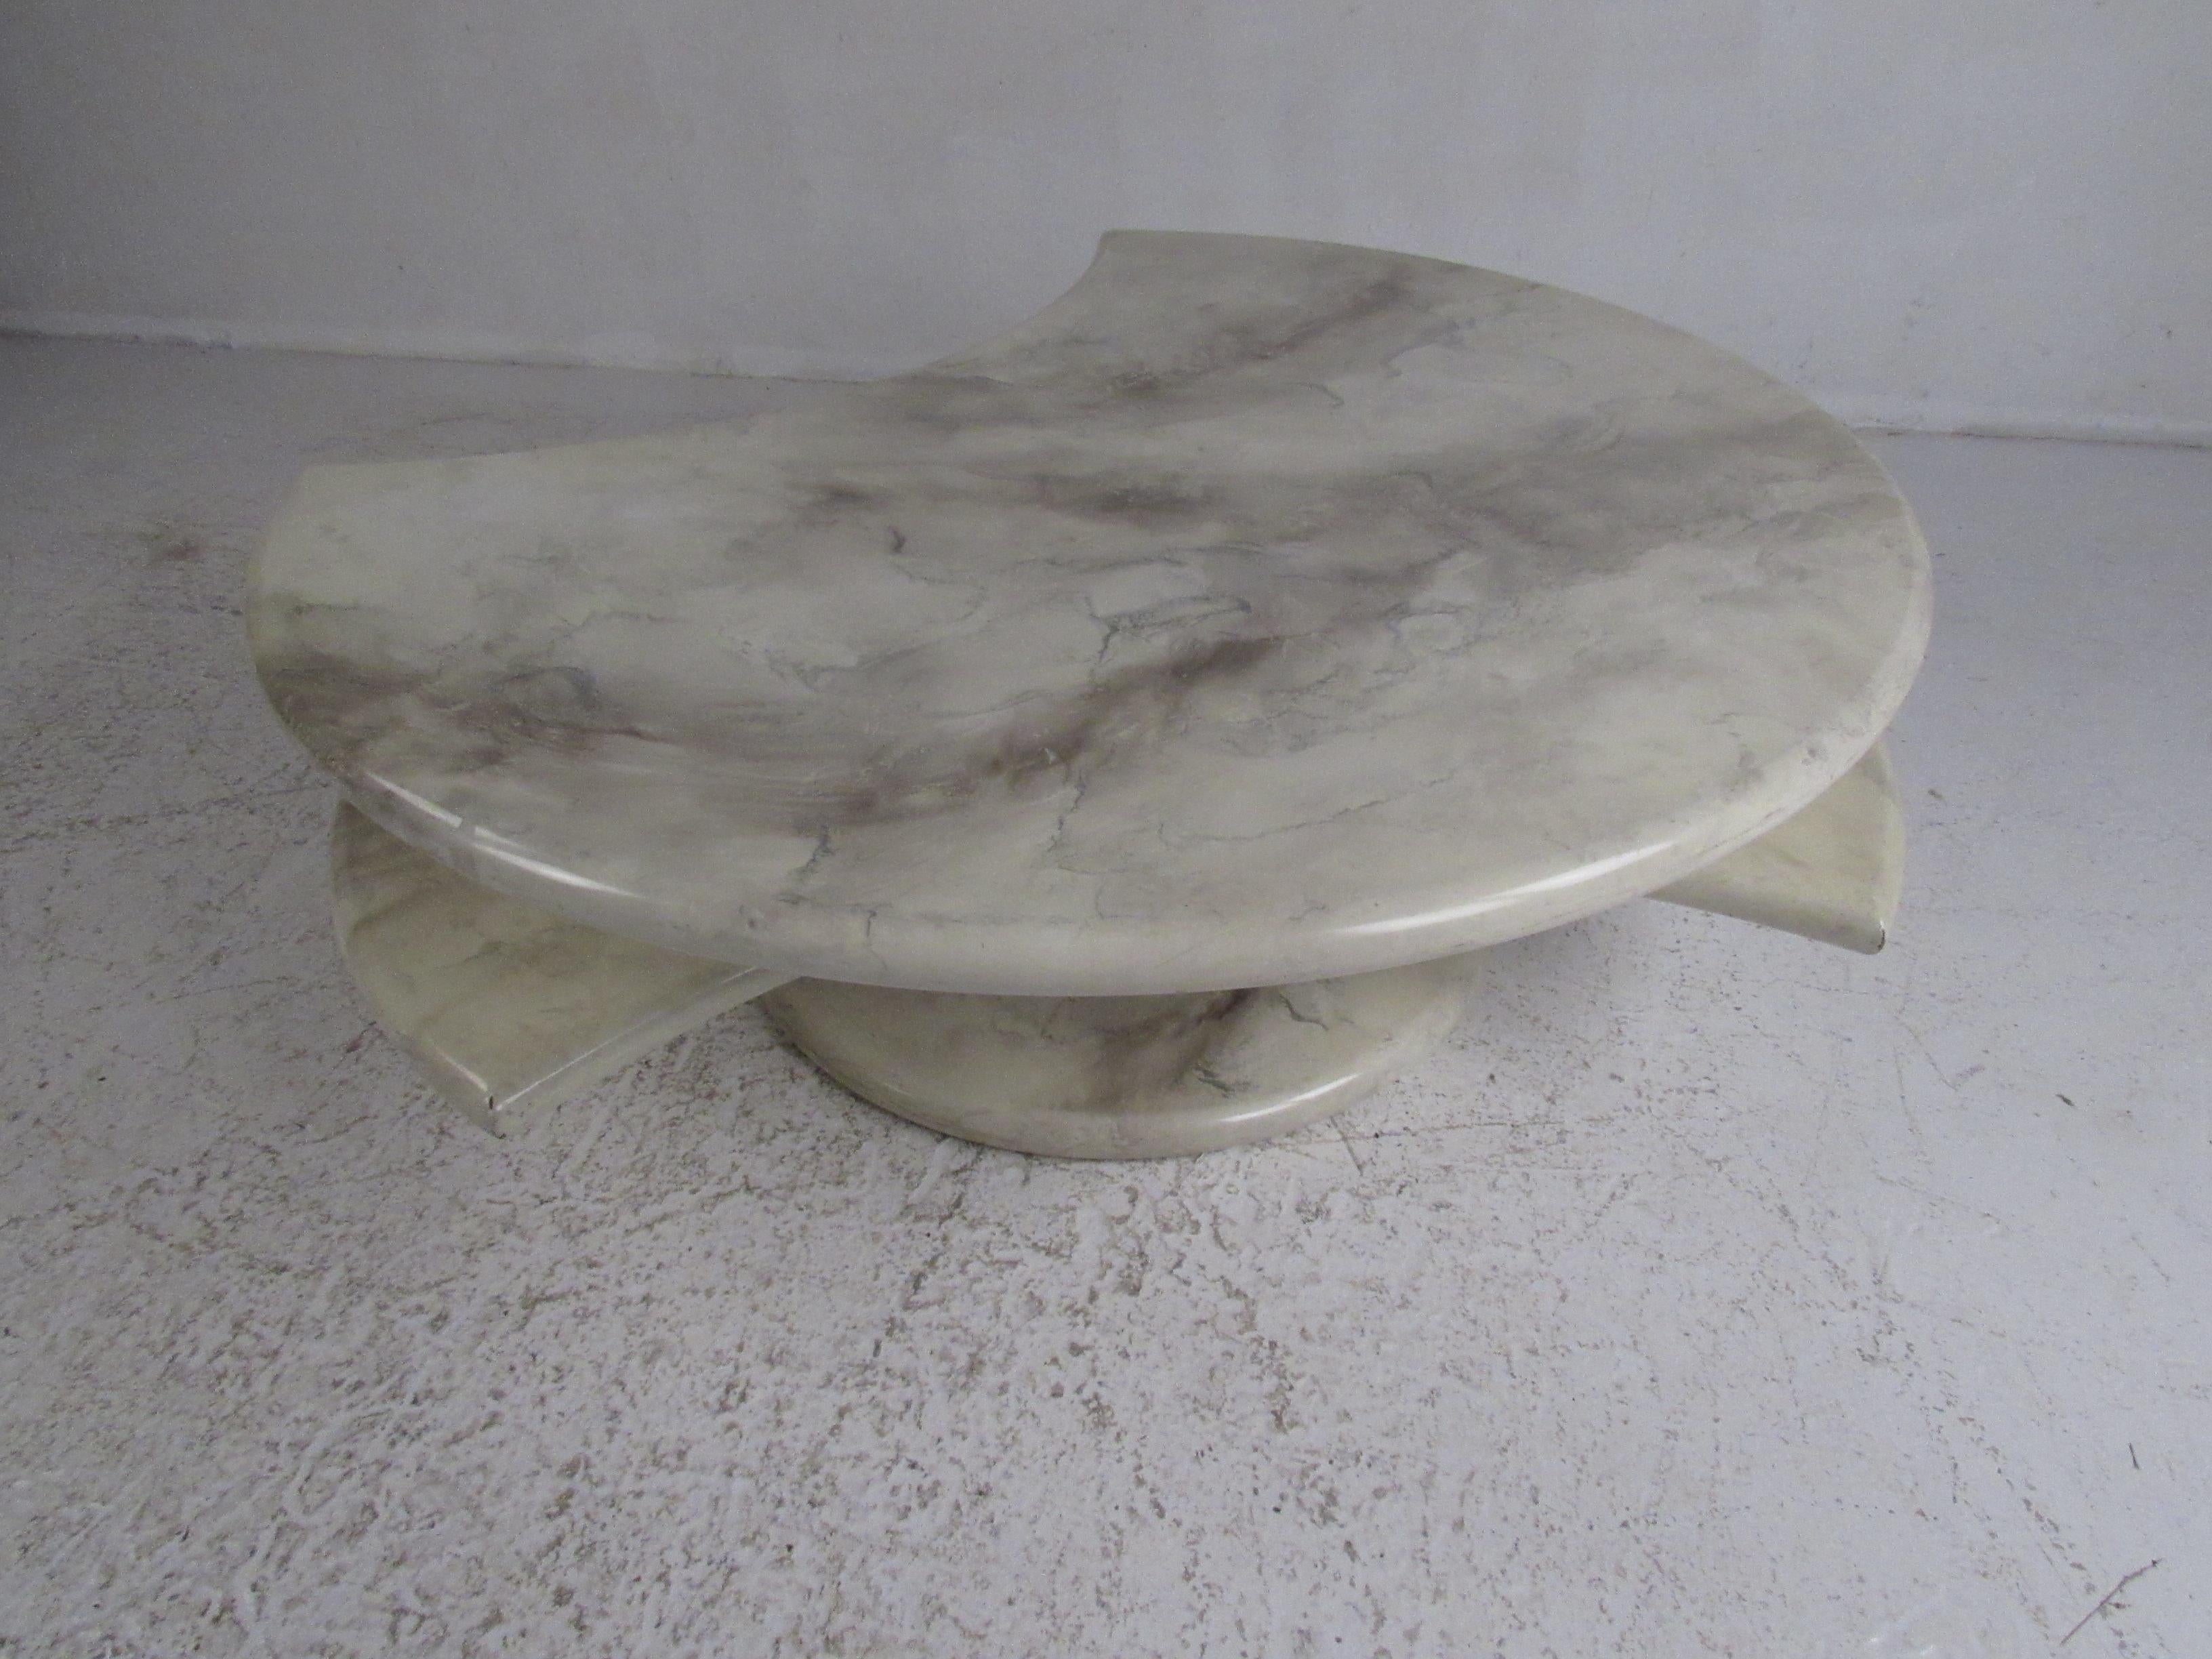 An unusual vintage modern two tier coffee table with a swivel top. The sleek design swivels outward unveiling a lower tier to set items on. A unique half moon shape, beautiful faux finish, and sturdy base make this cocktail table the perfect